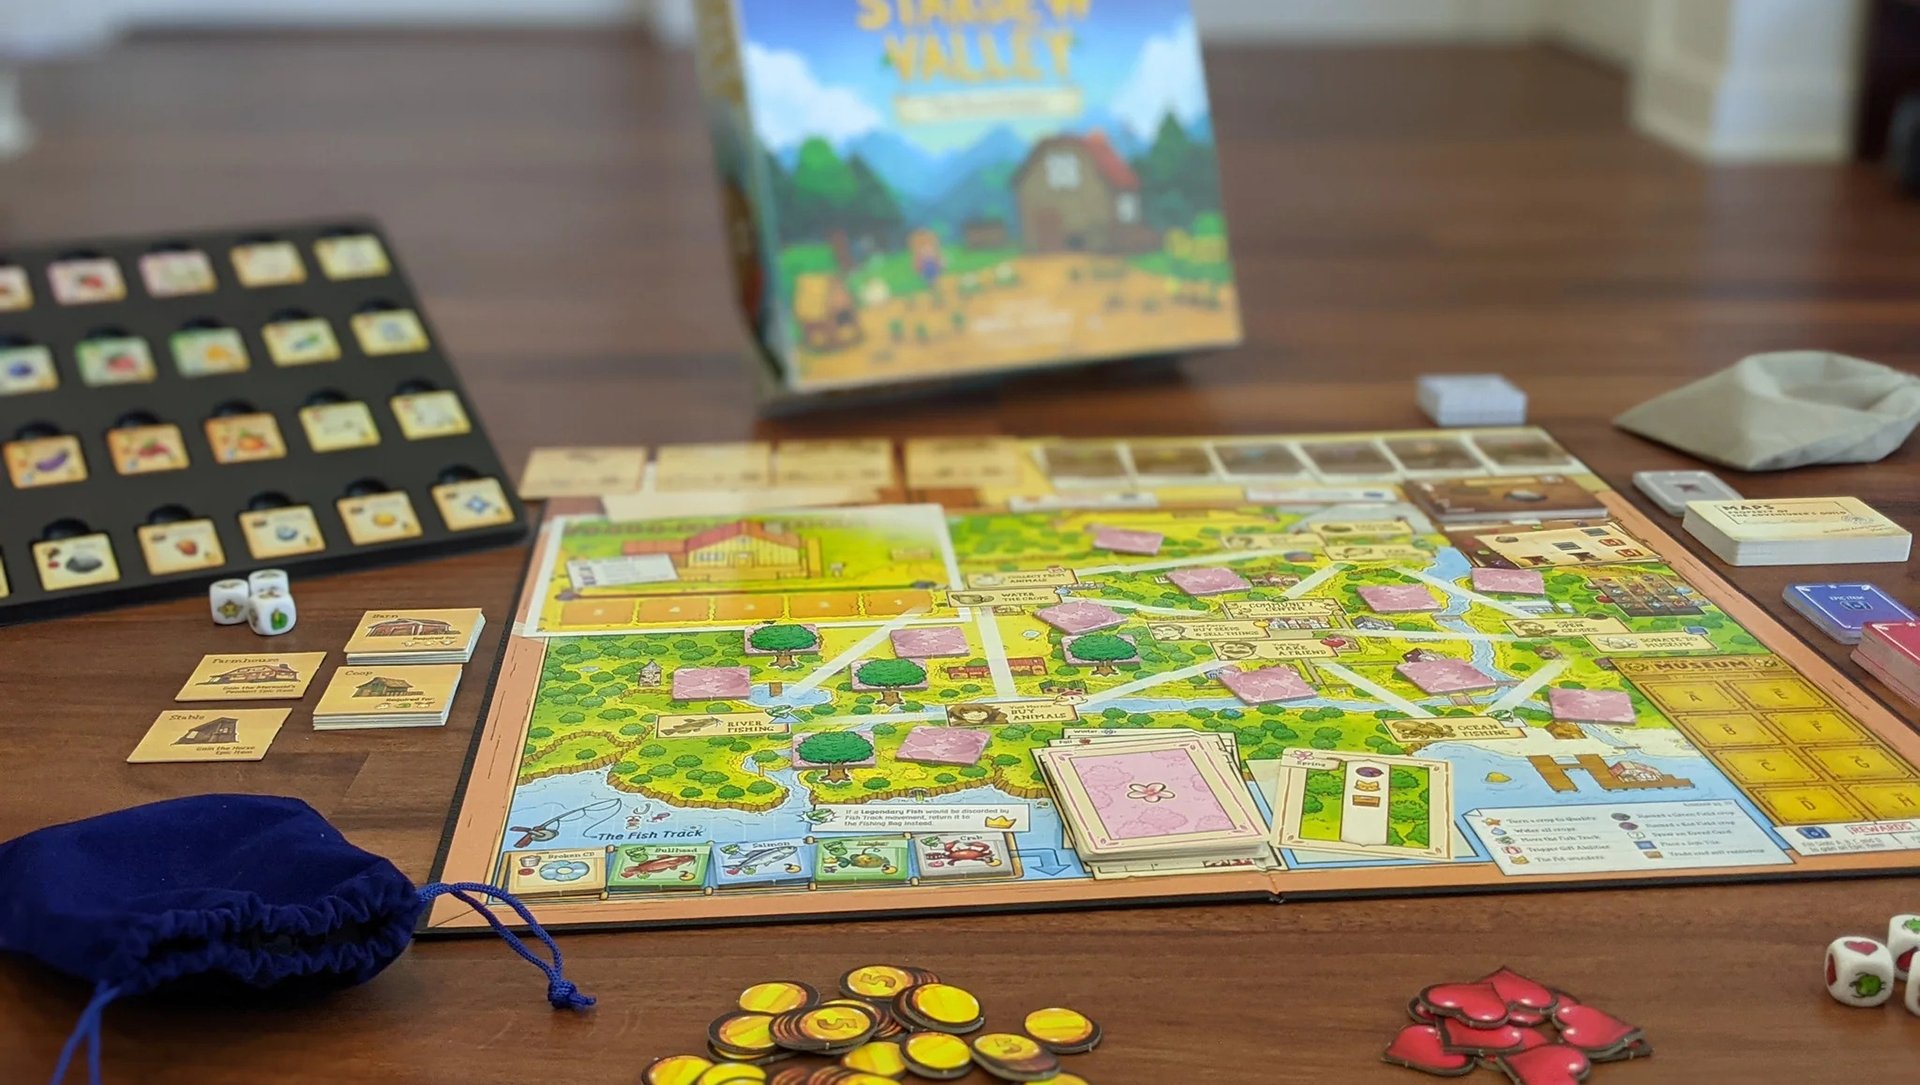 A new round of Stardew Valley board game pre-orders is coming